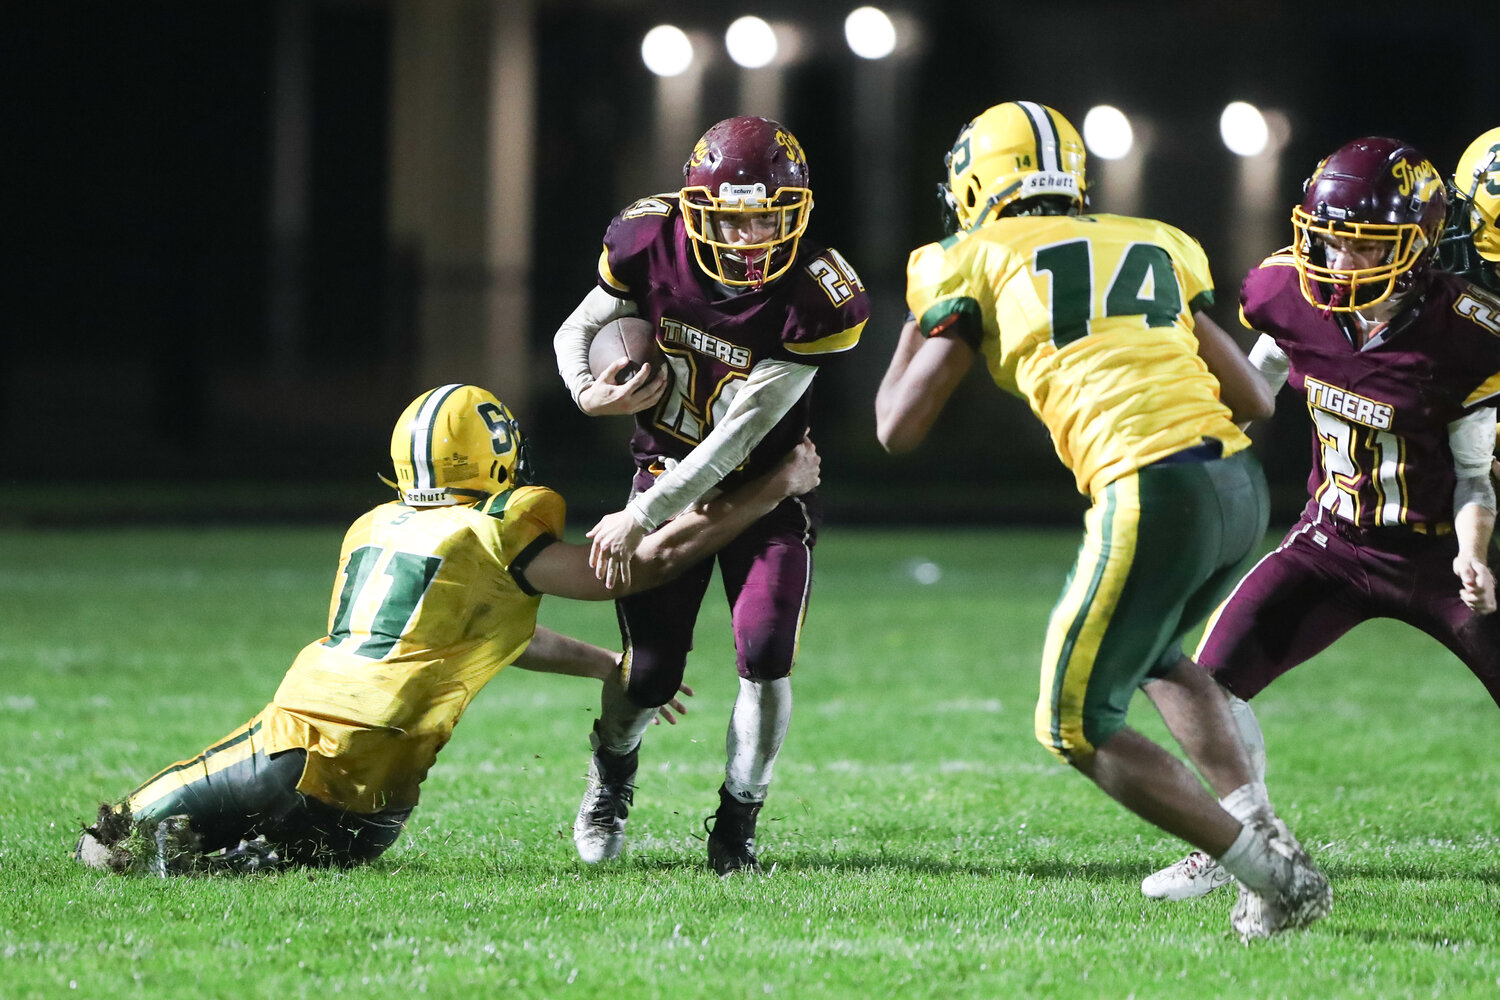 Running back Evan Lapointe is tackled during the game.